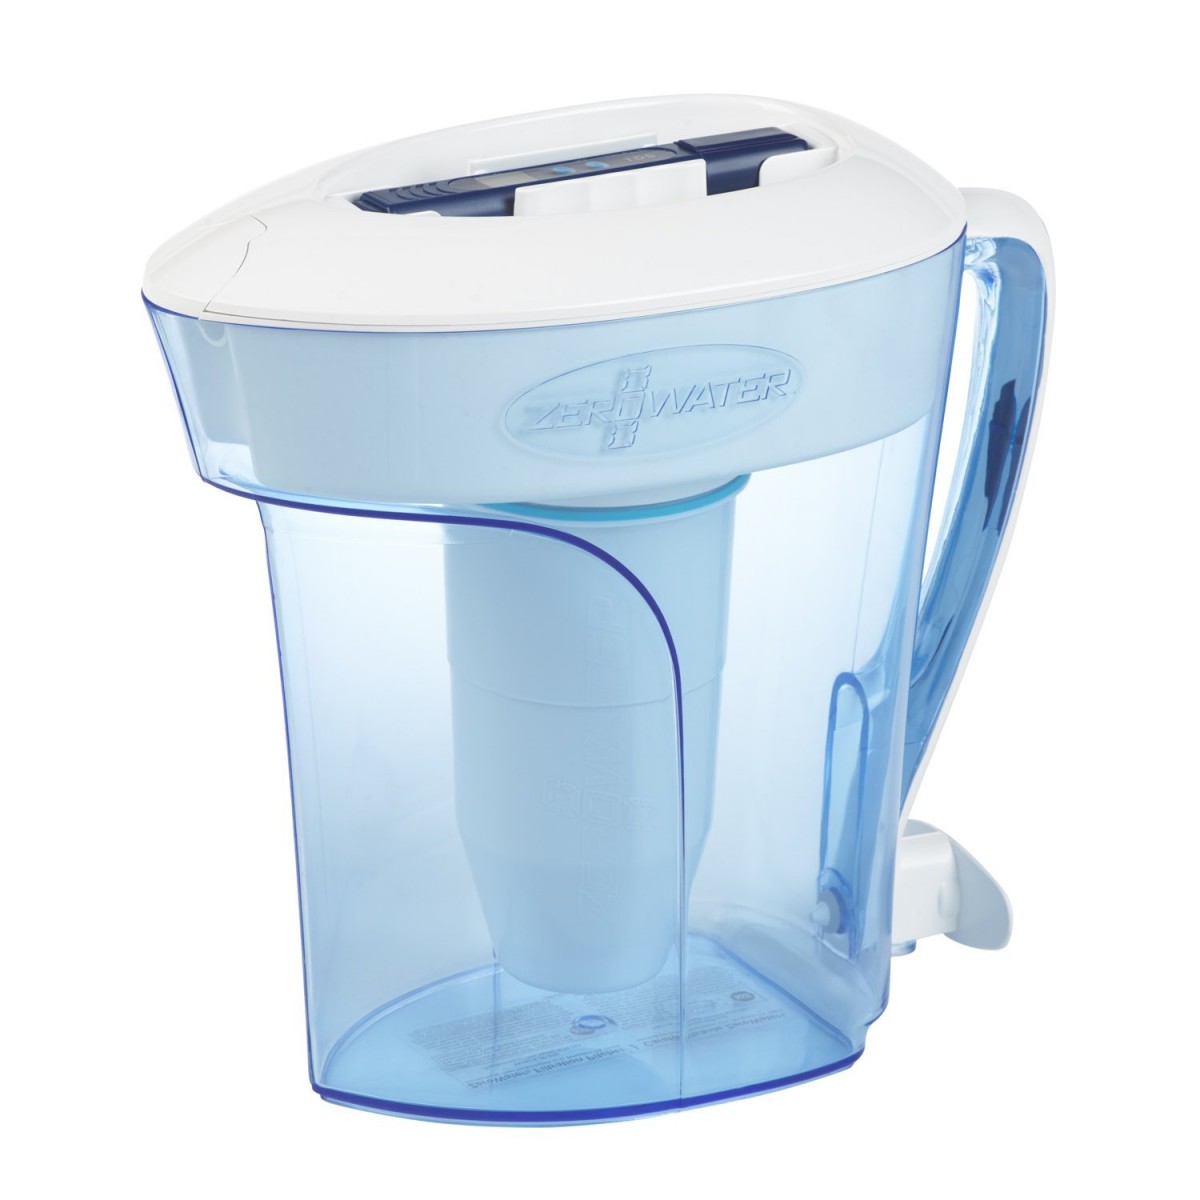 ZeroWater 10-Cup Pitcher Review